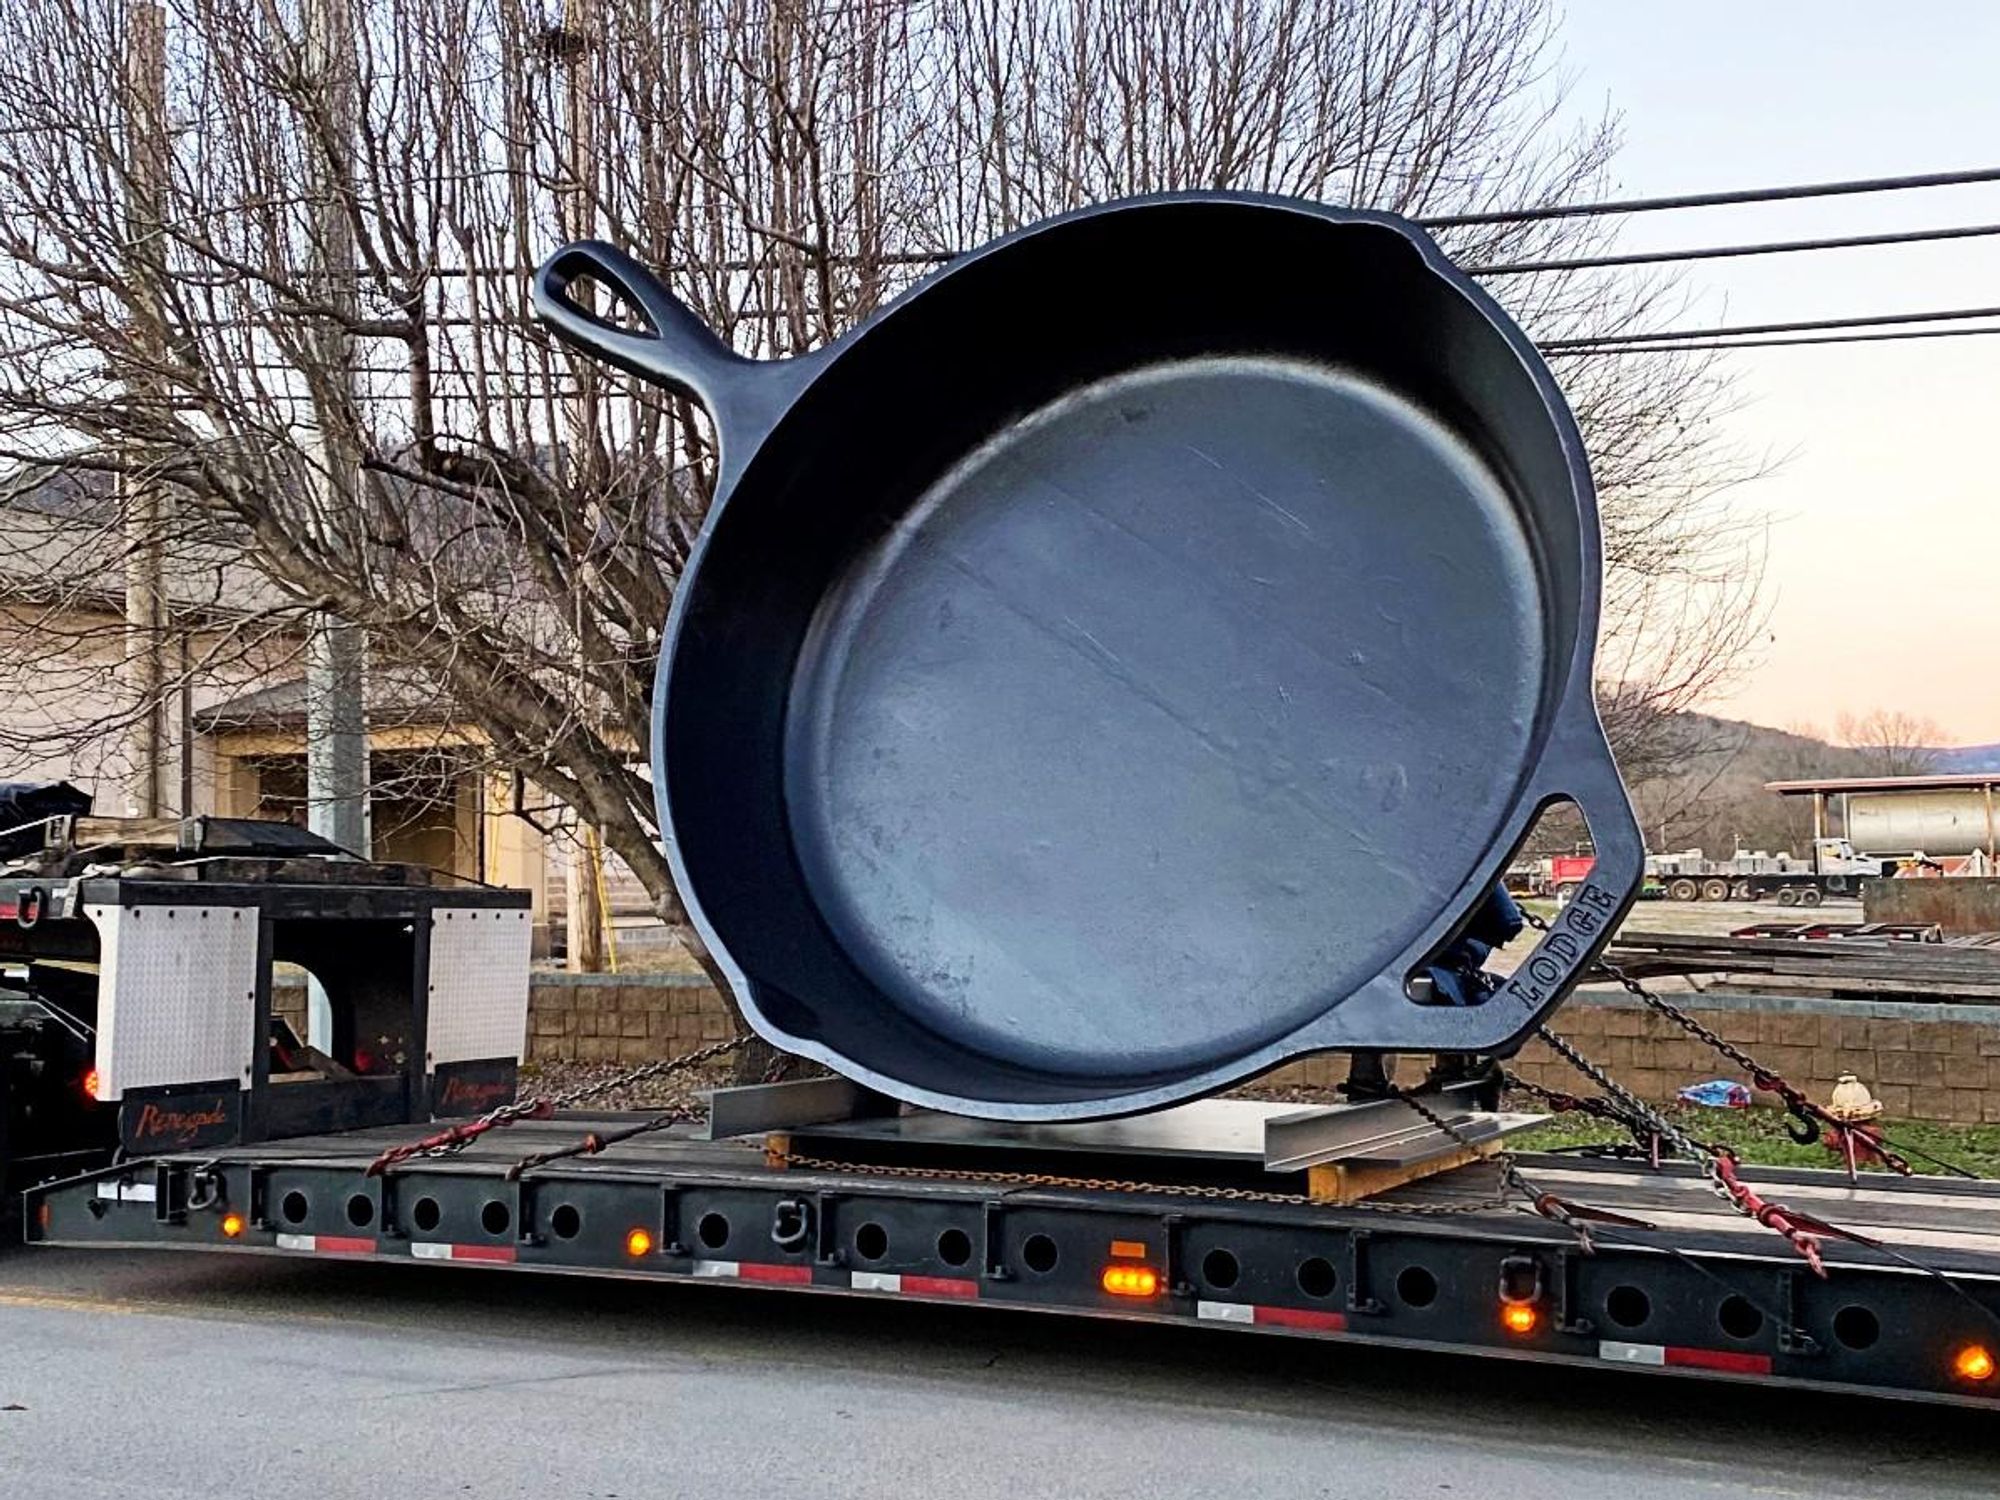 Feast your eyes on the world's largest cast iron skillet weighing 14,000  lbs. in Tennessee